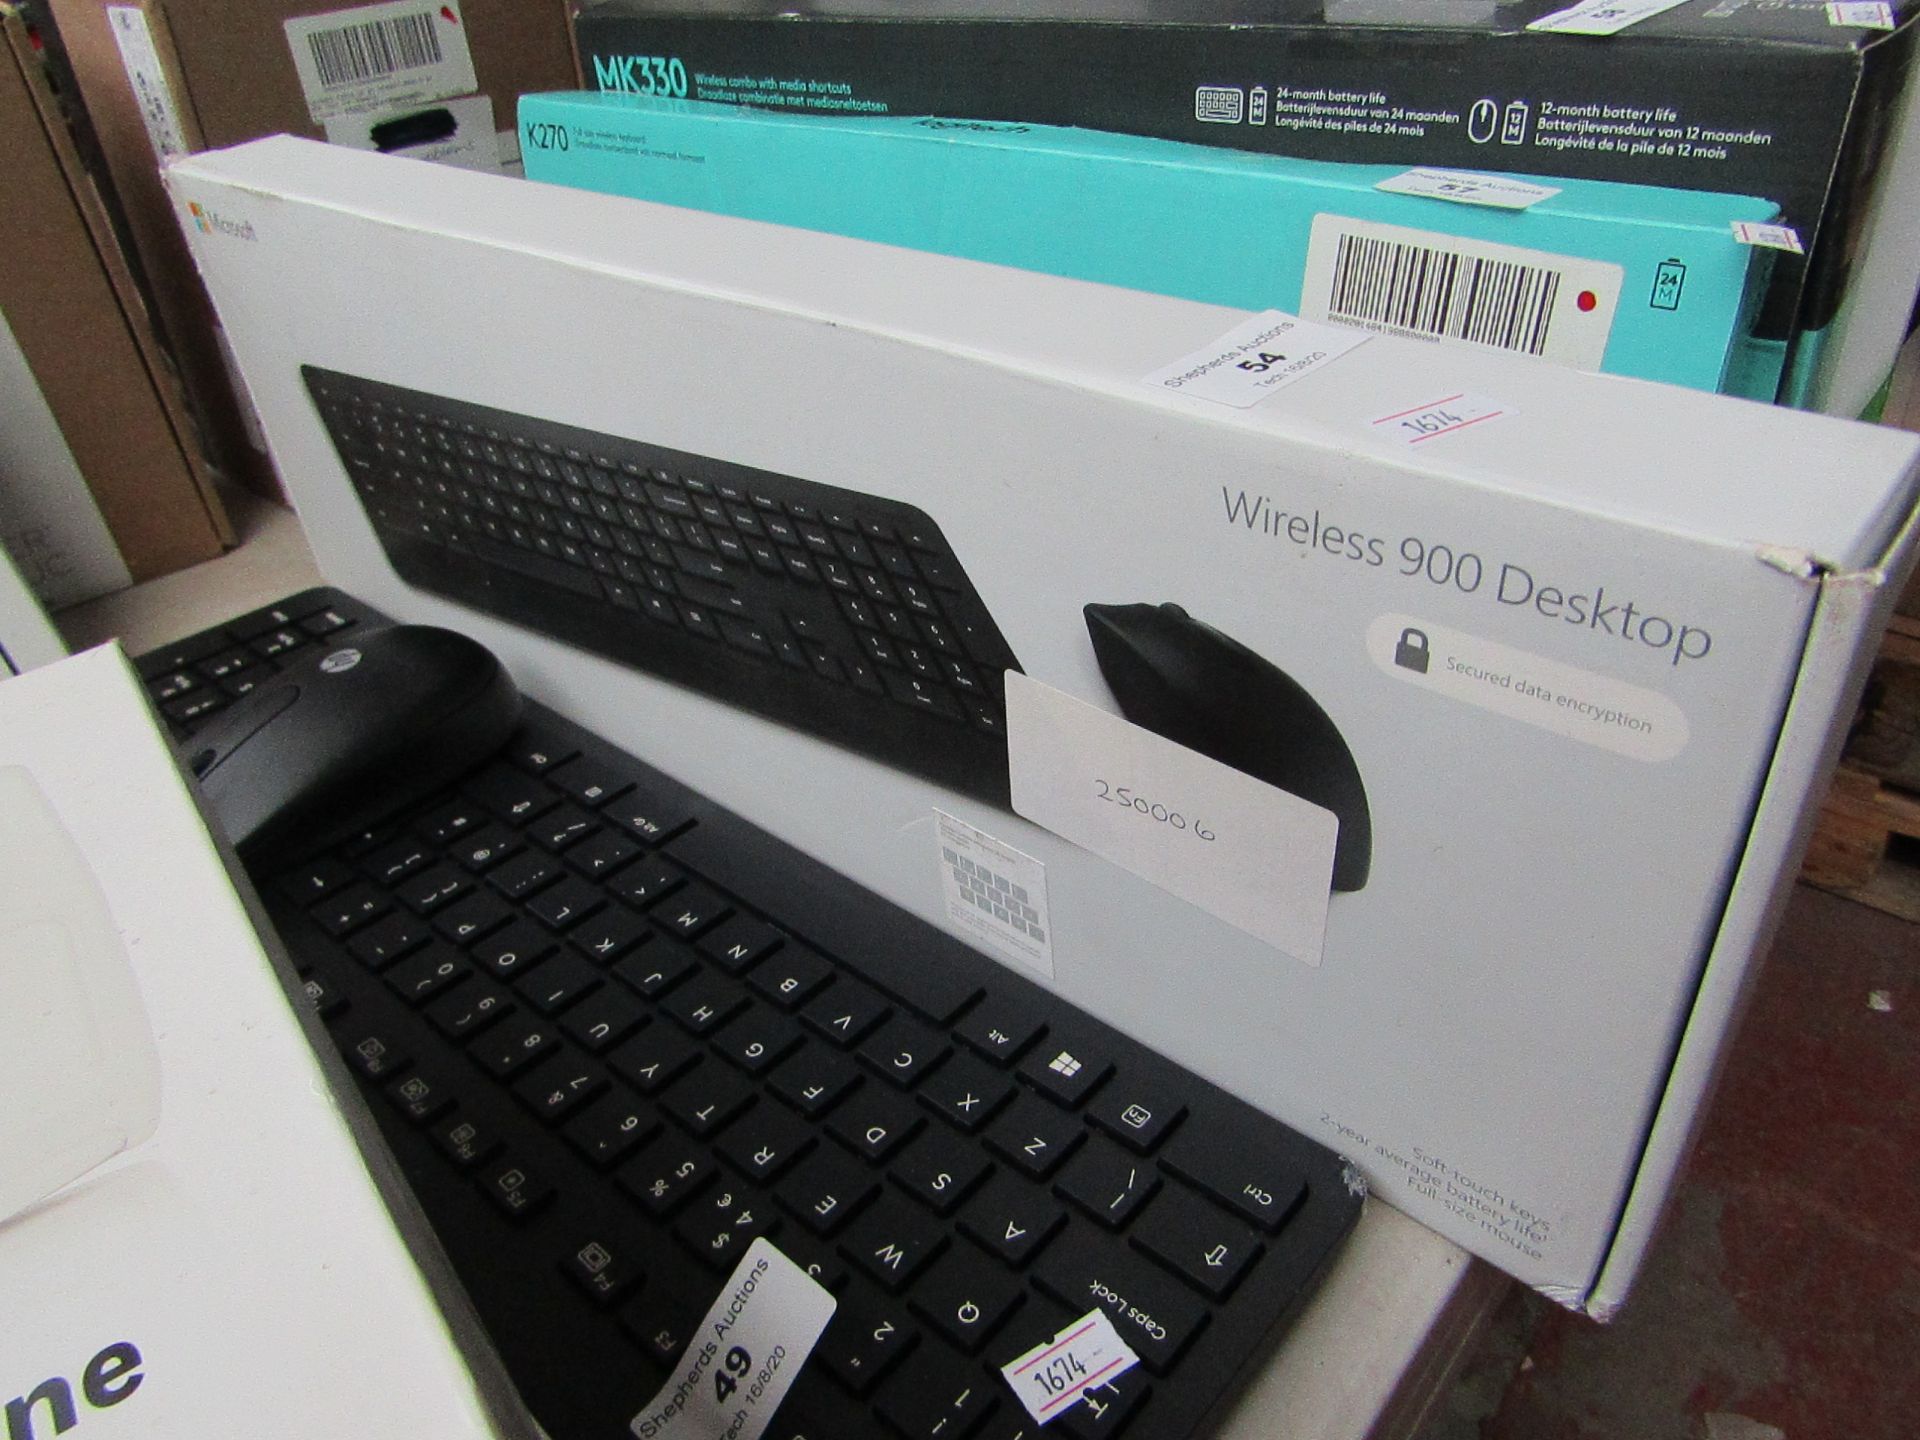 Microsoft wireless 900 desktop with soft touch keys, unchecked and boxed.